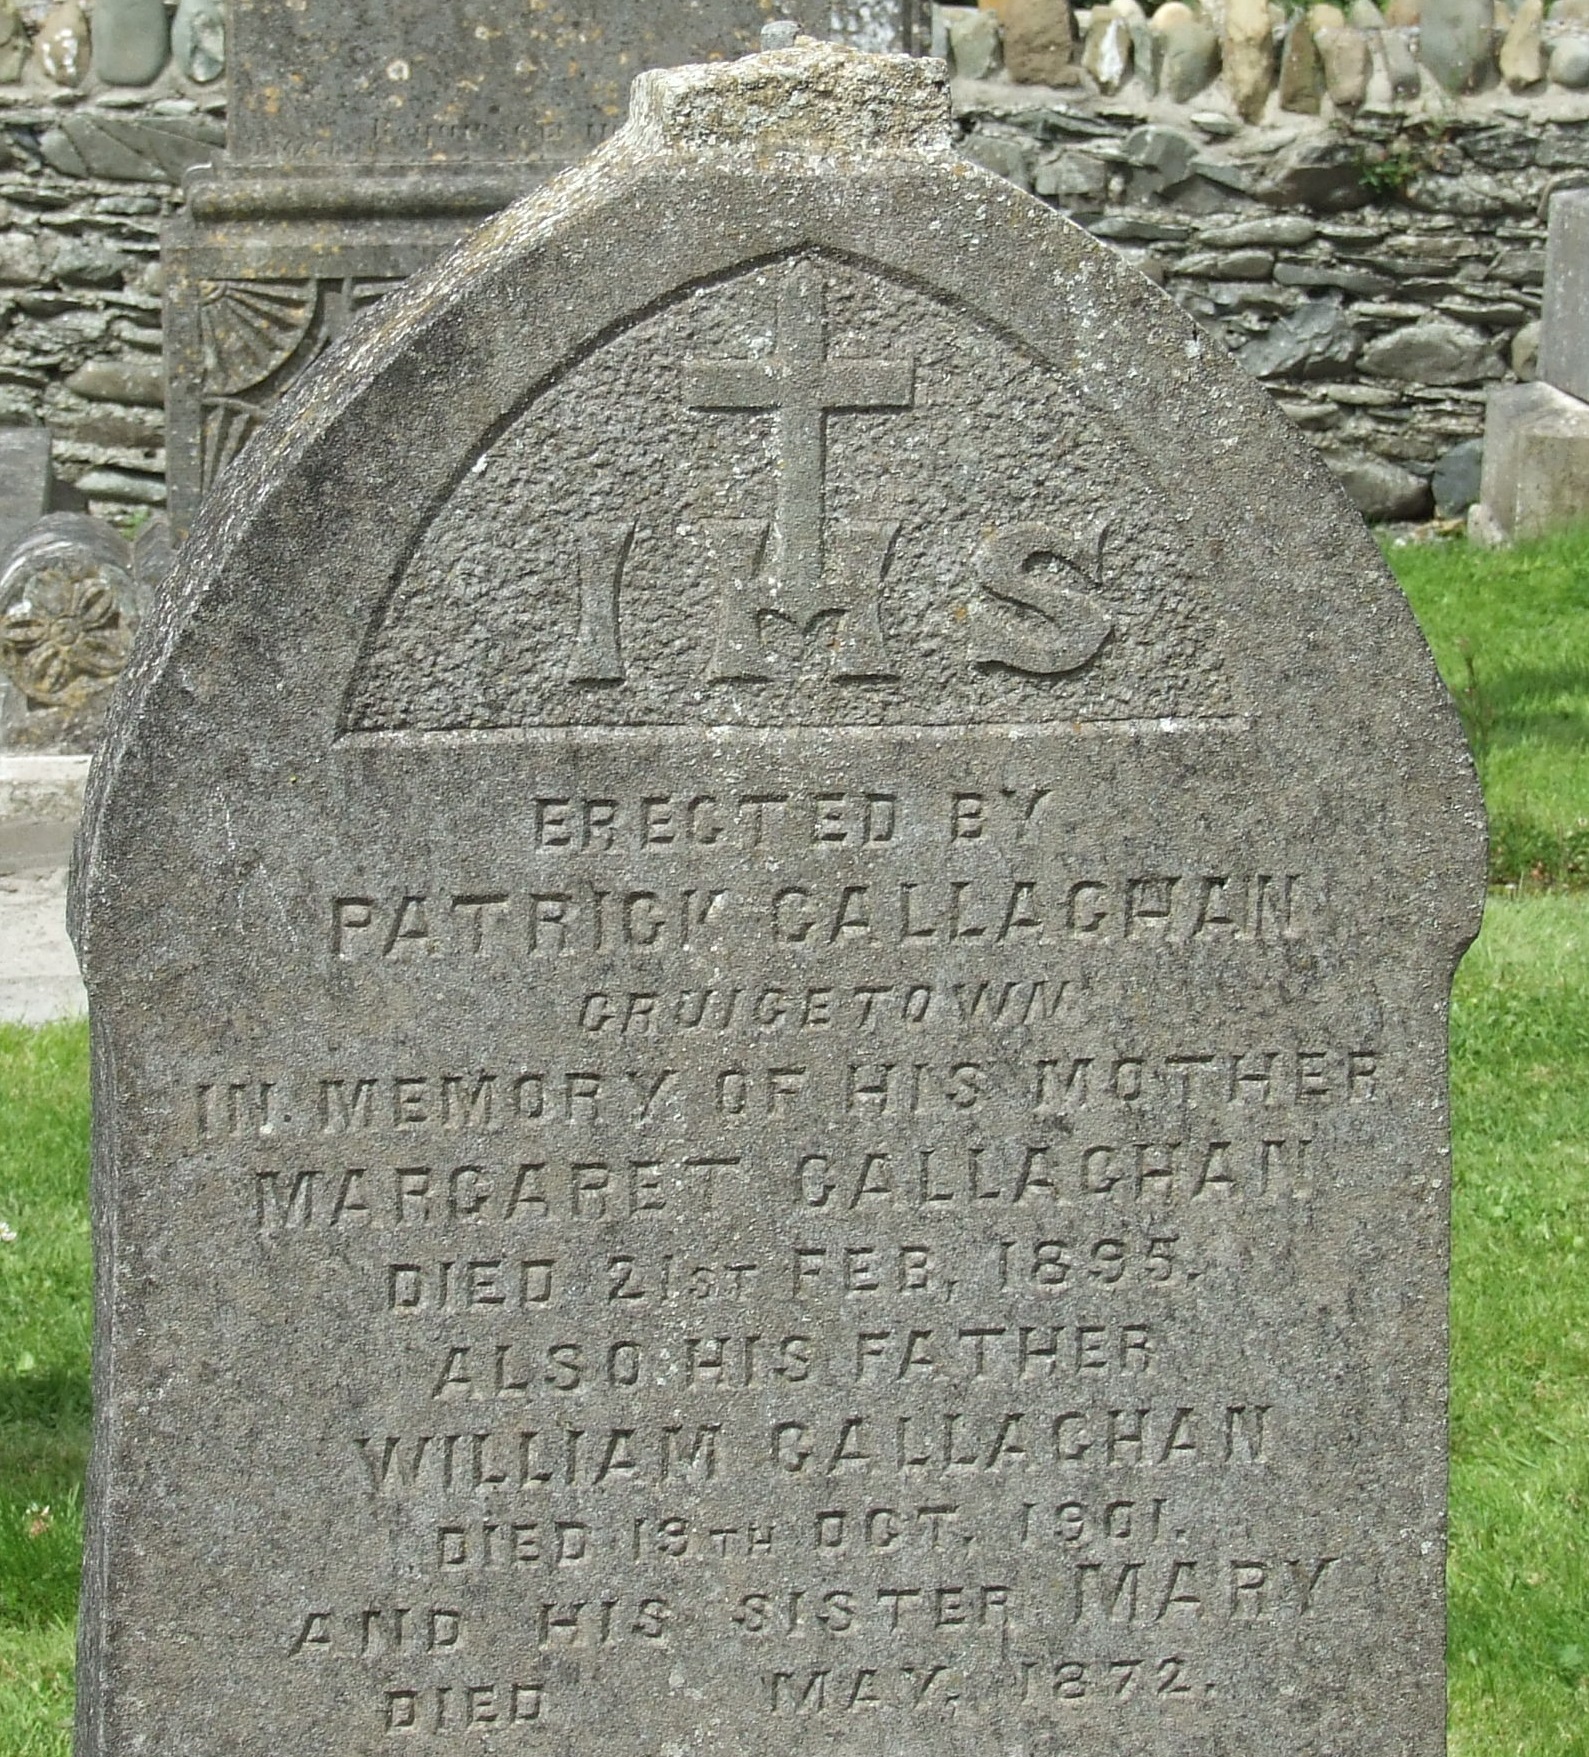 A headstone with the erector prominently mentioned (Port, Co. Louth)